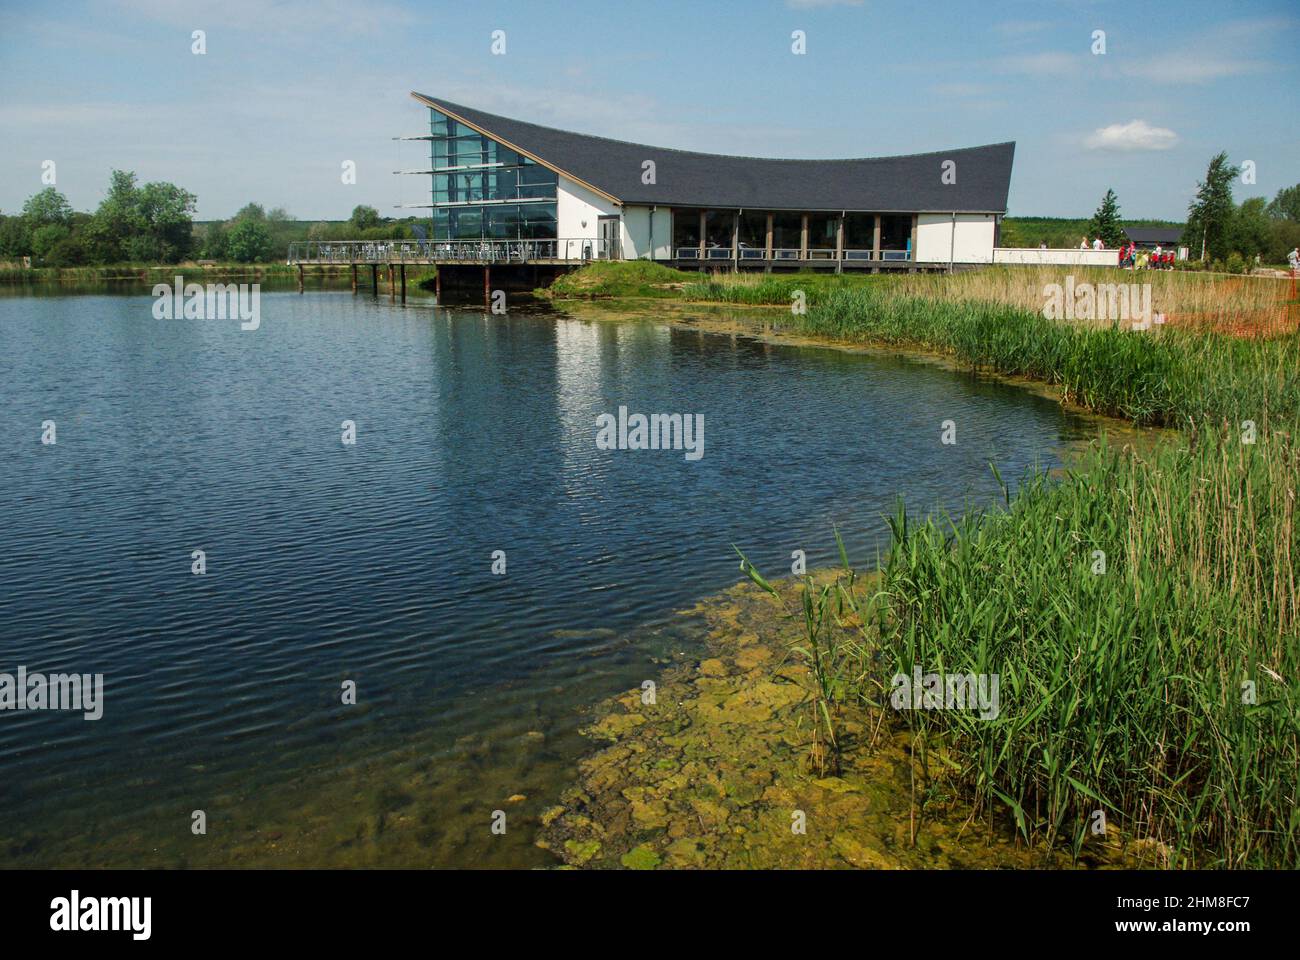 The Visitor Centre at Stanwick Lakes, a countryside attraction and nature reserve, Northamptonshire, UK Stock Photo